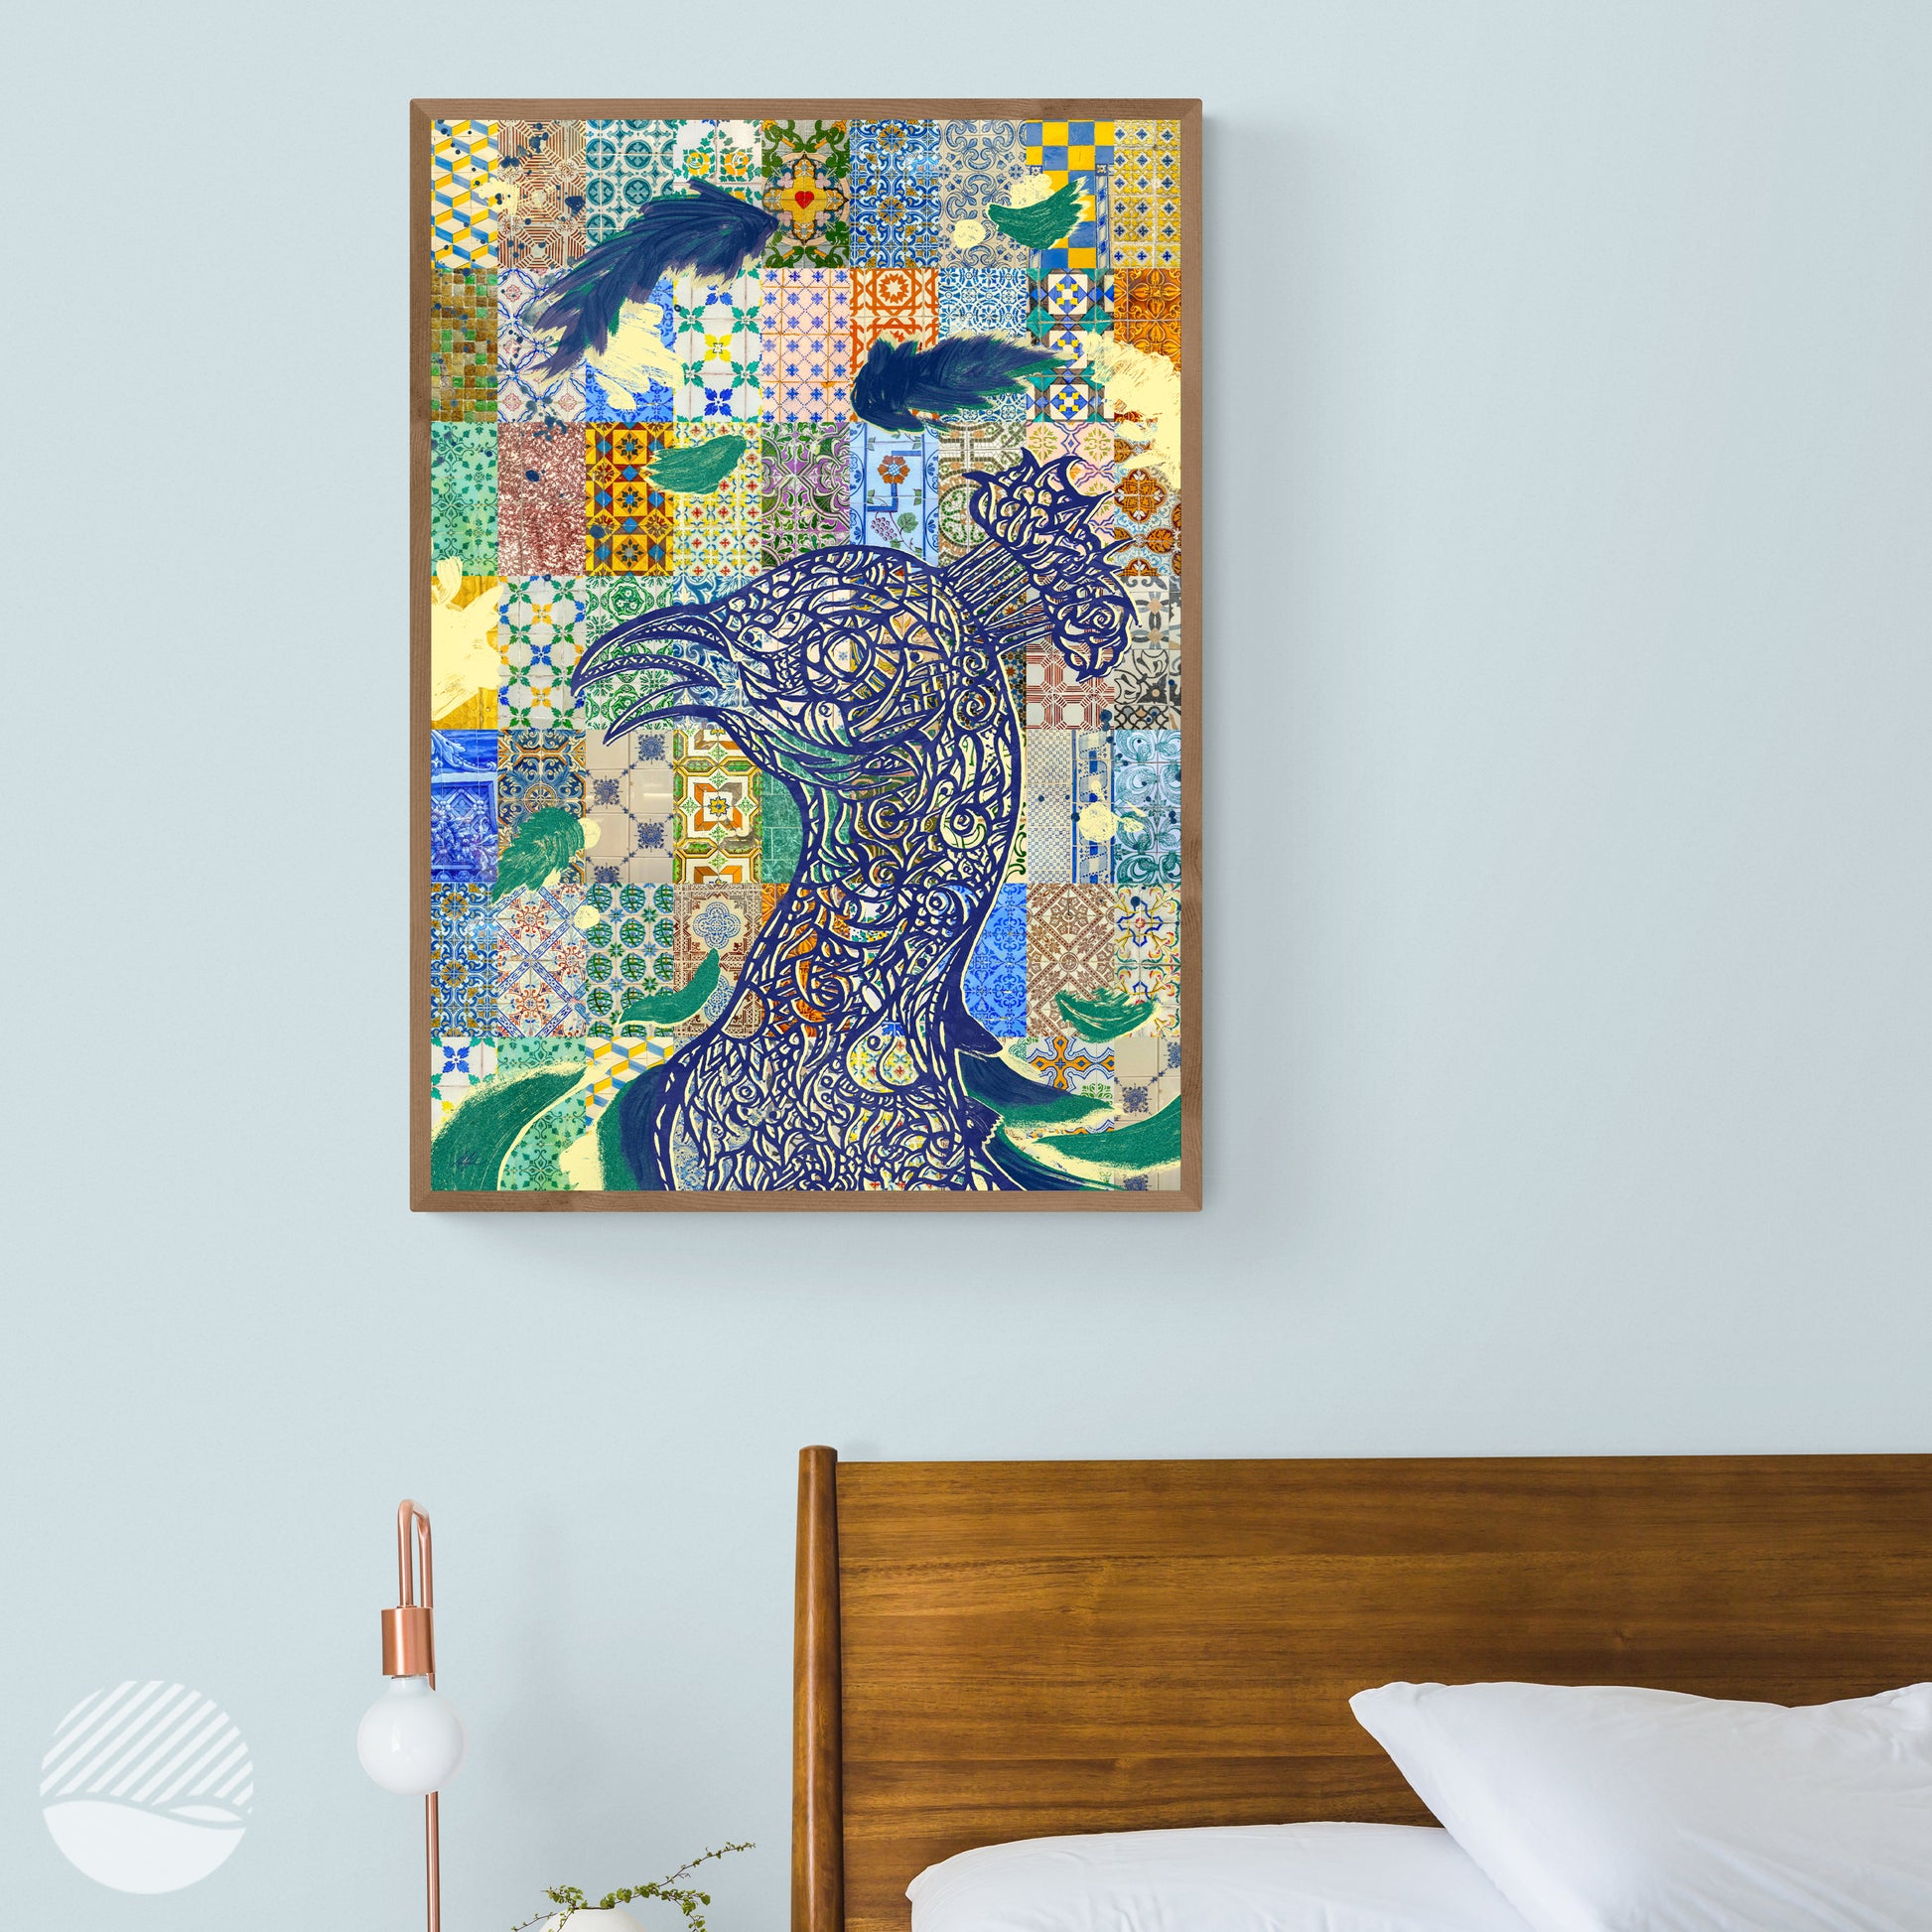 Prominent Peacock by Alan Pedersen - Alantherock - day edition in bedroom